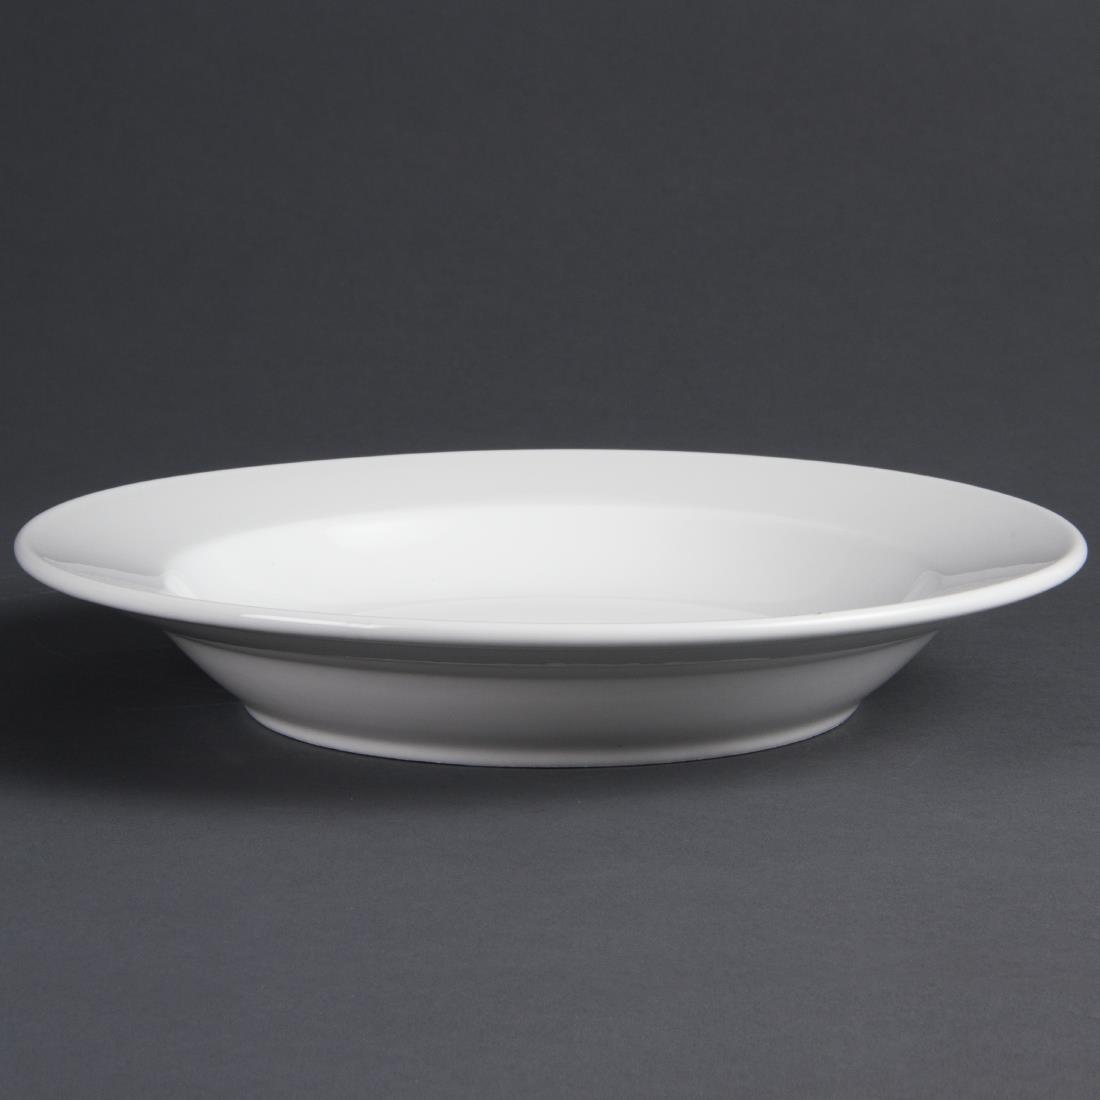 Olympia Whiteware Deep Plates 270mm 430ml (Pack of 6) - C363  - 1